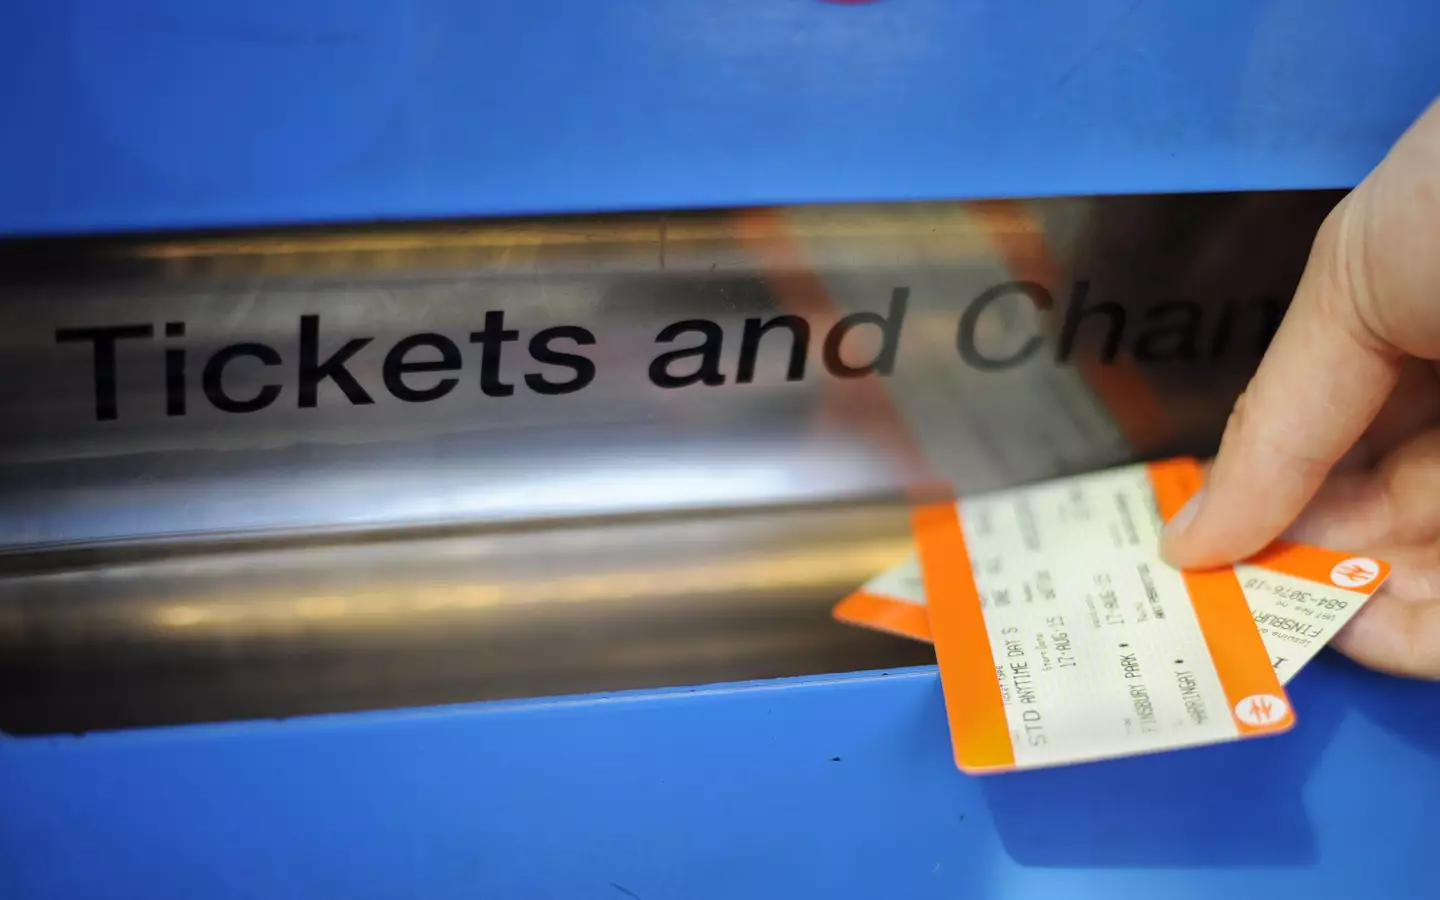 Tickets bought through the rail fare sale will apply to journeys from 25 April - 27 May.